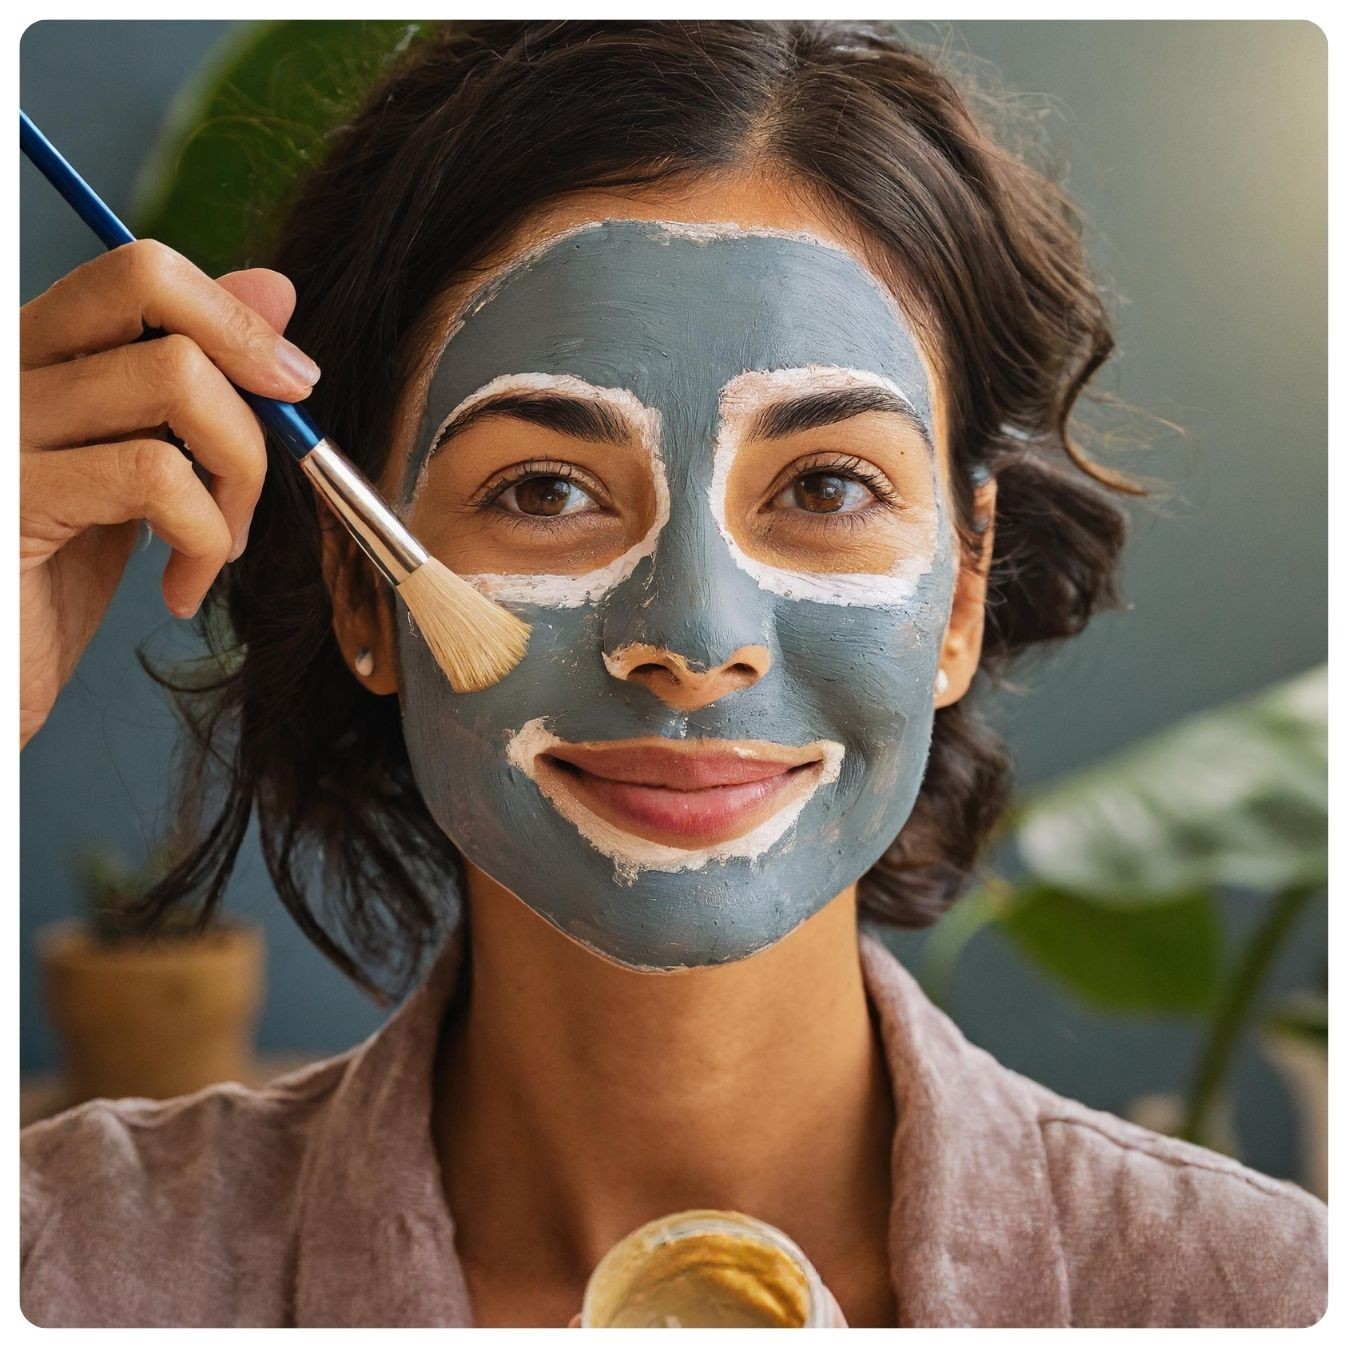 Face masks are an important spa treatment for your spa day at home. You can also use body lotion and hair masks for the full self care experience.